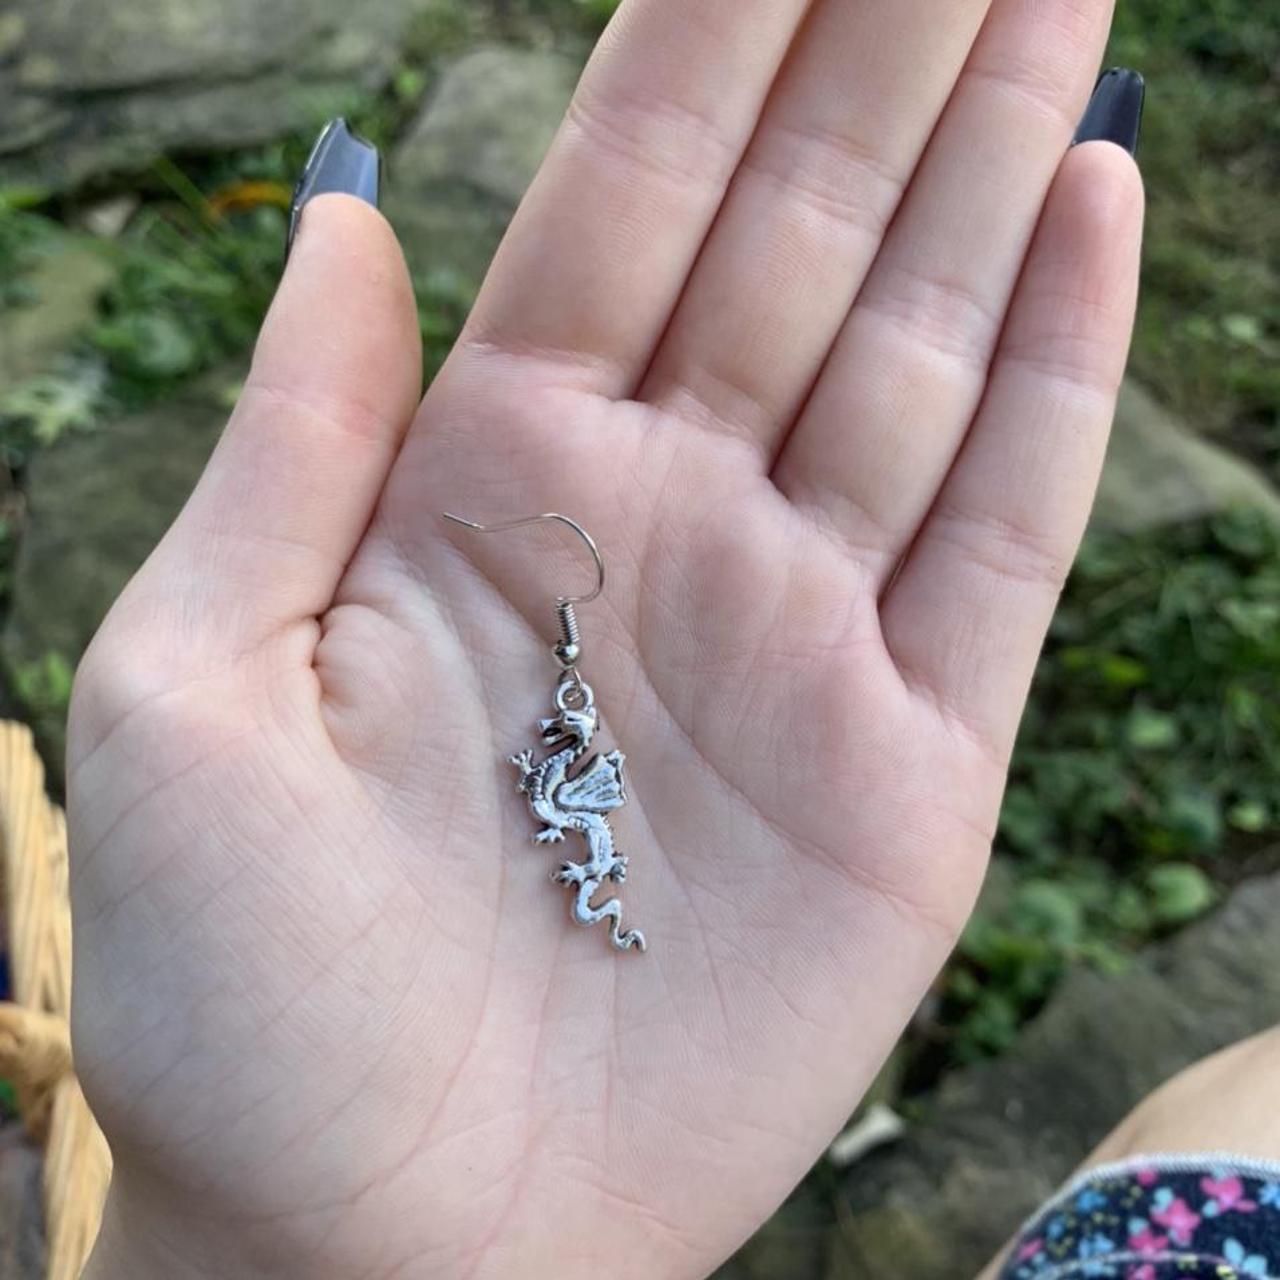 Product Image 2 - Little dragon earrings! 🦋

These are